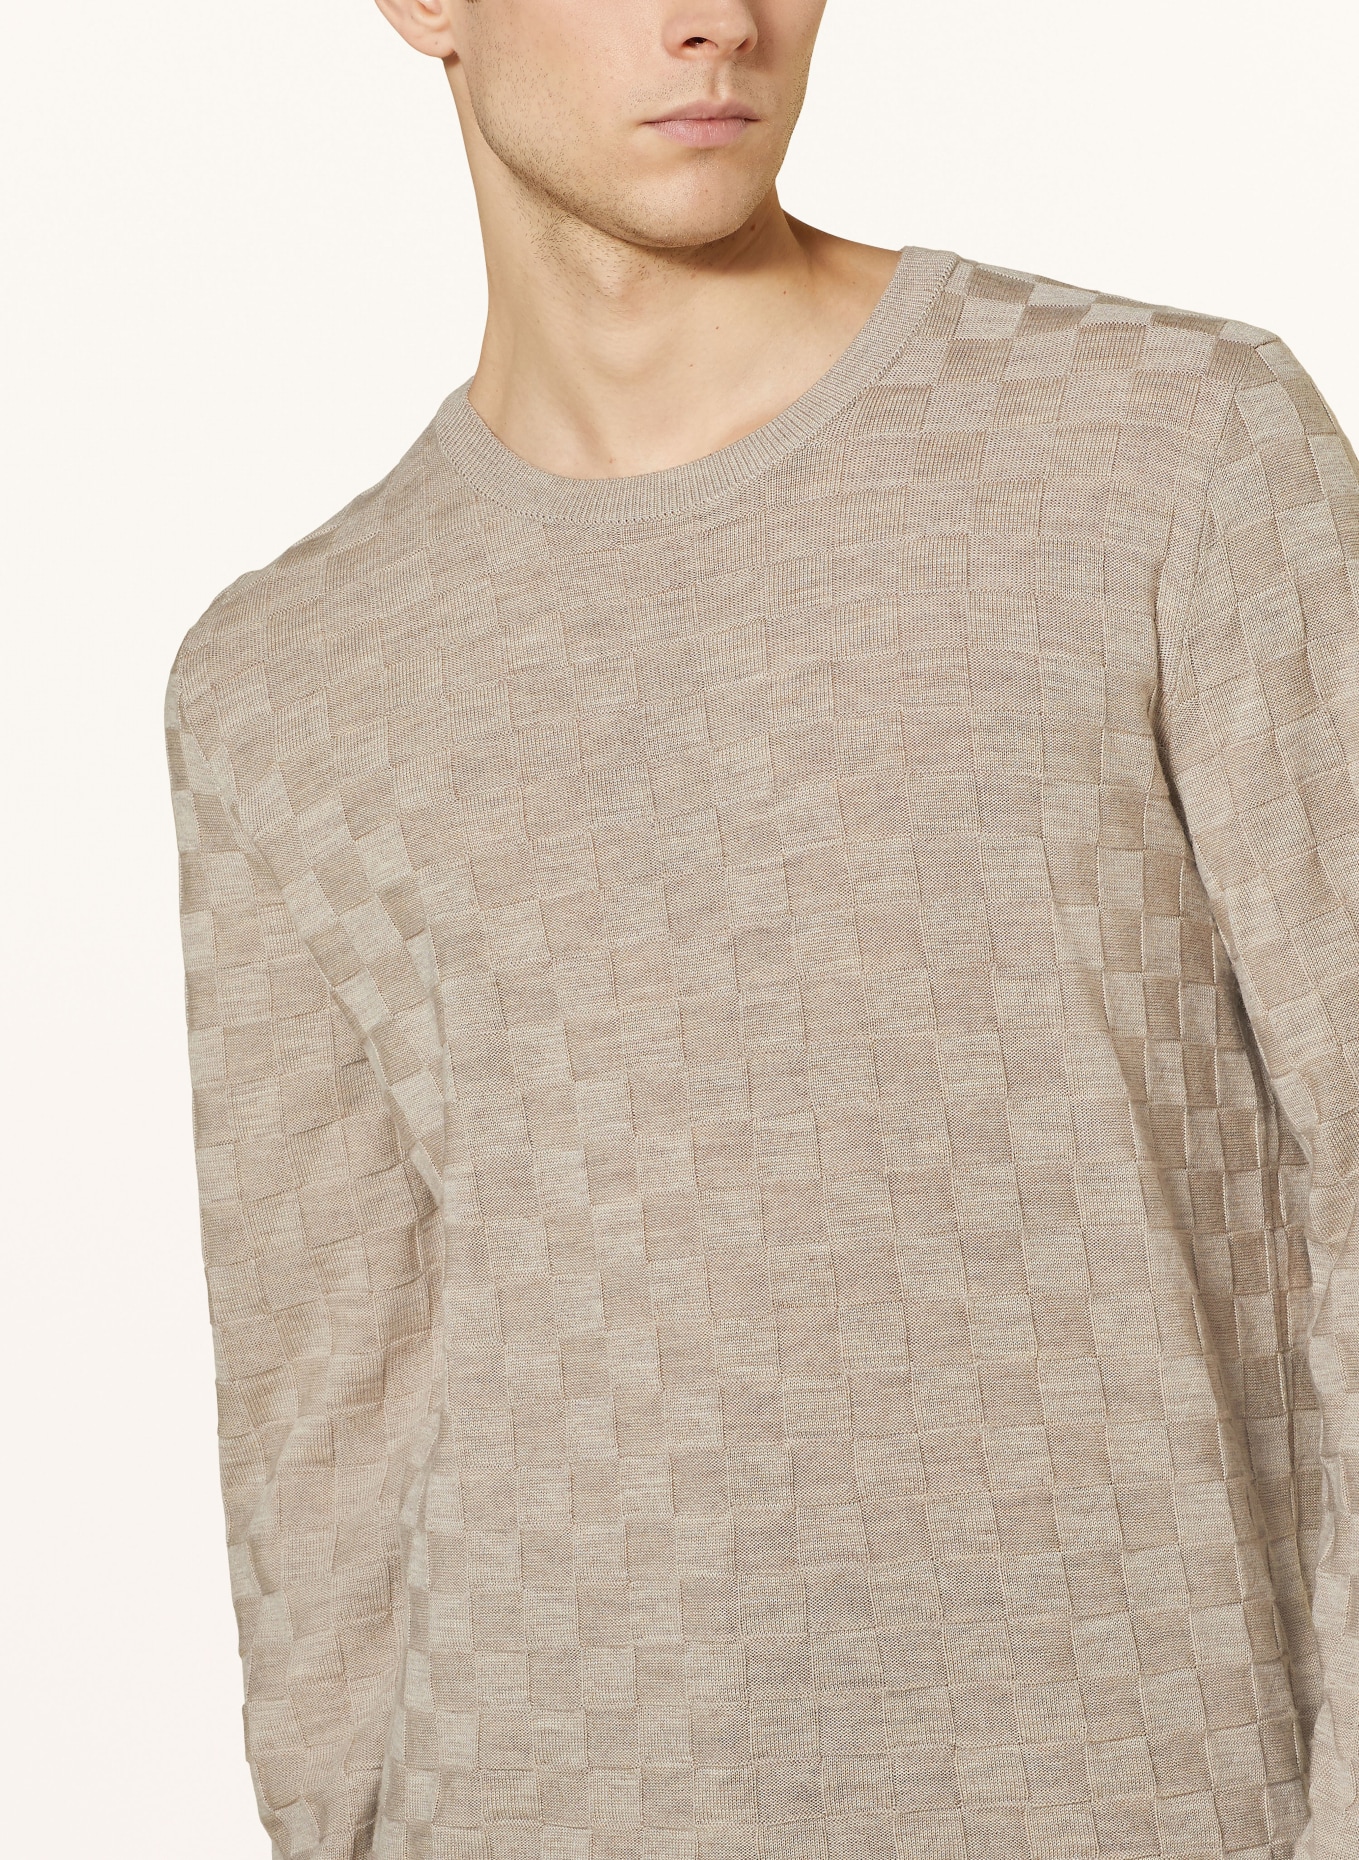 MAERZ MUENCHEN Sweater, Color: BEIGE (Image 4)